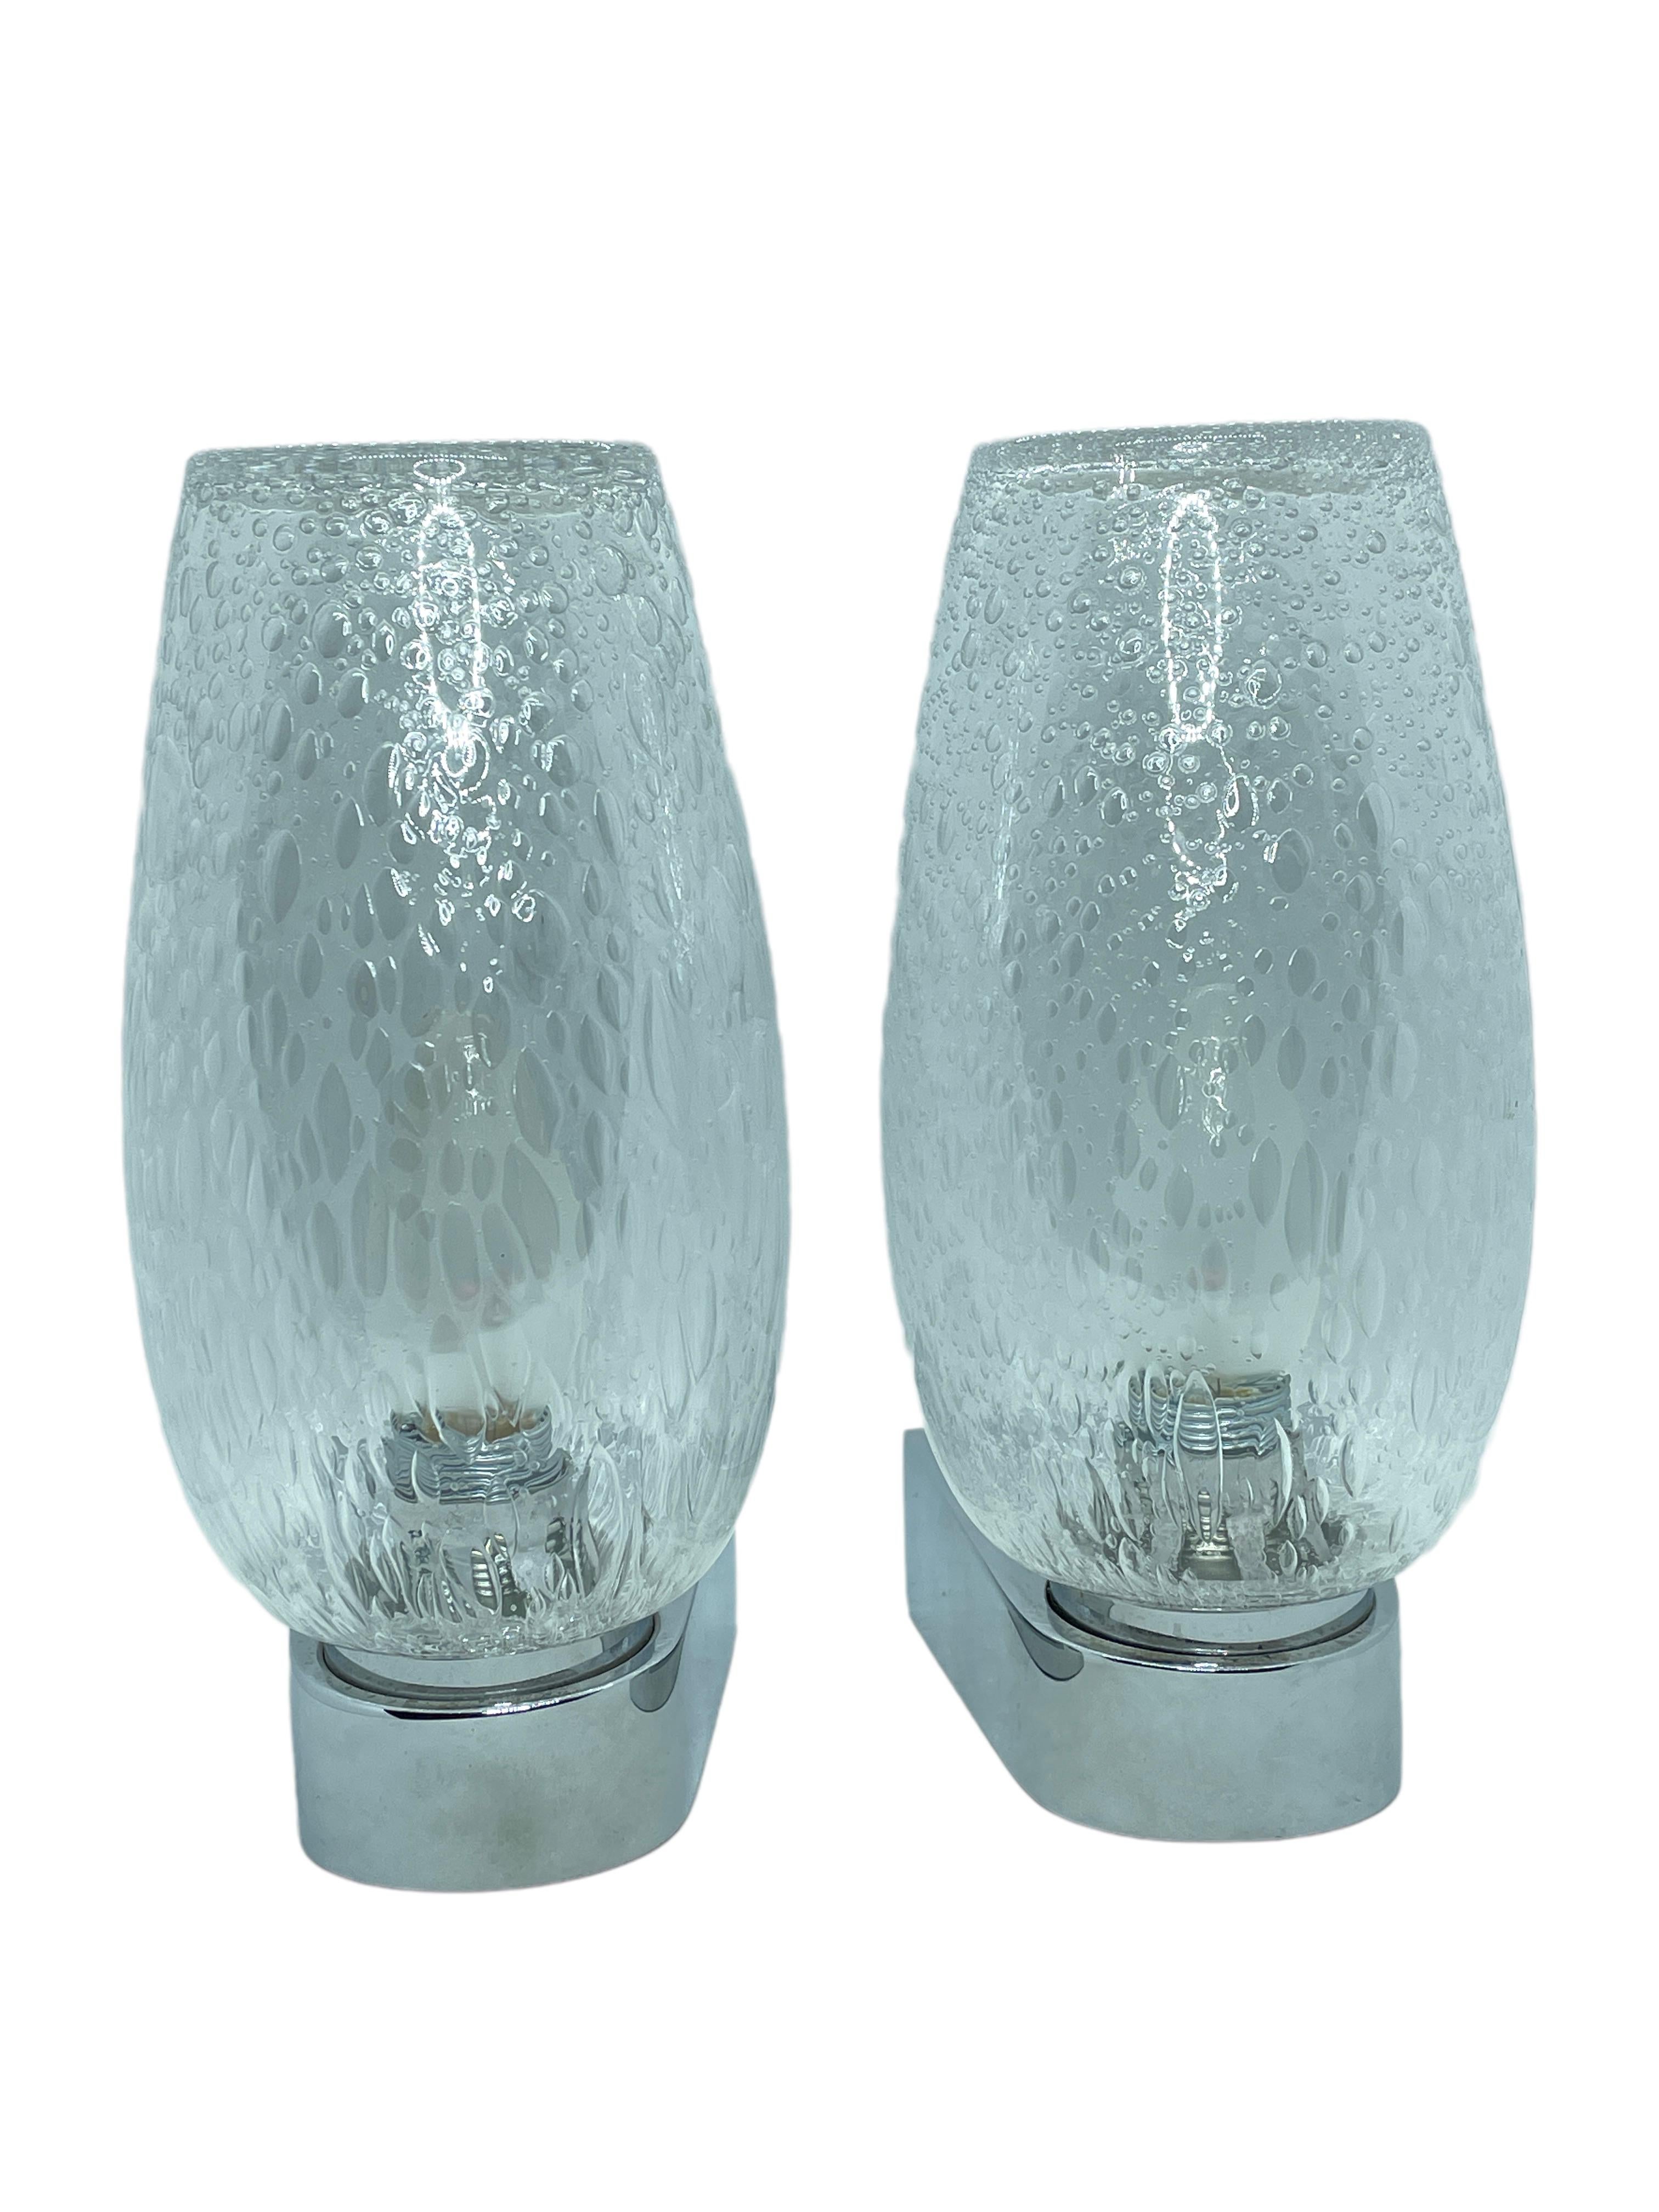 Pair of bubble glass sconces with chrome metal base. Made in Germany by Keuco Leuchten. Each fixture requires one European E14 / 110 Volt candelabra bulb, up to 40 watts. Nice chic design gives a real classy statement. Lightbulbs seen in the